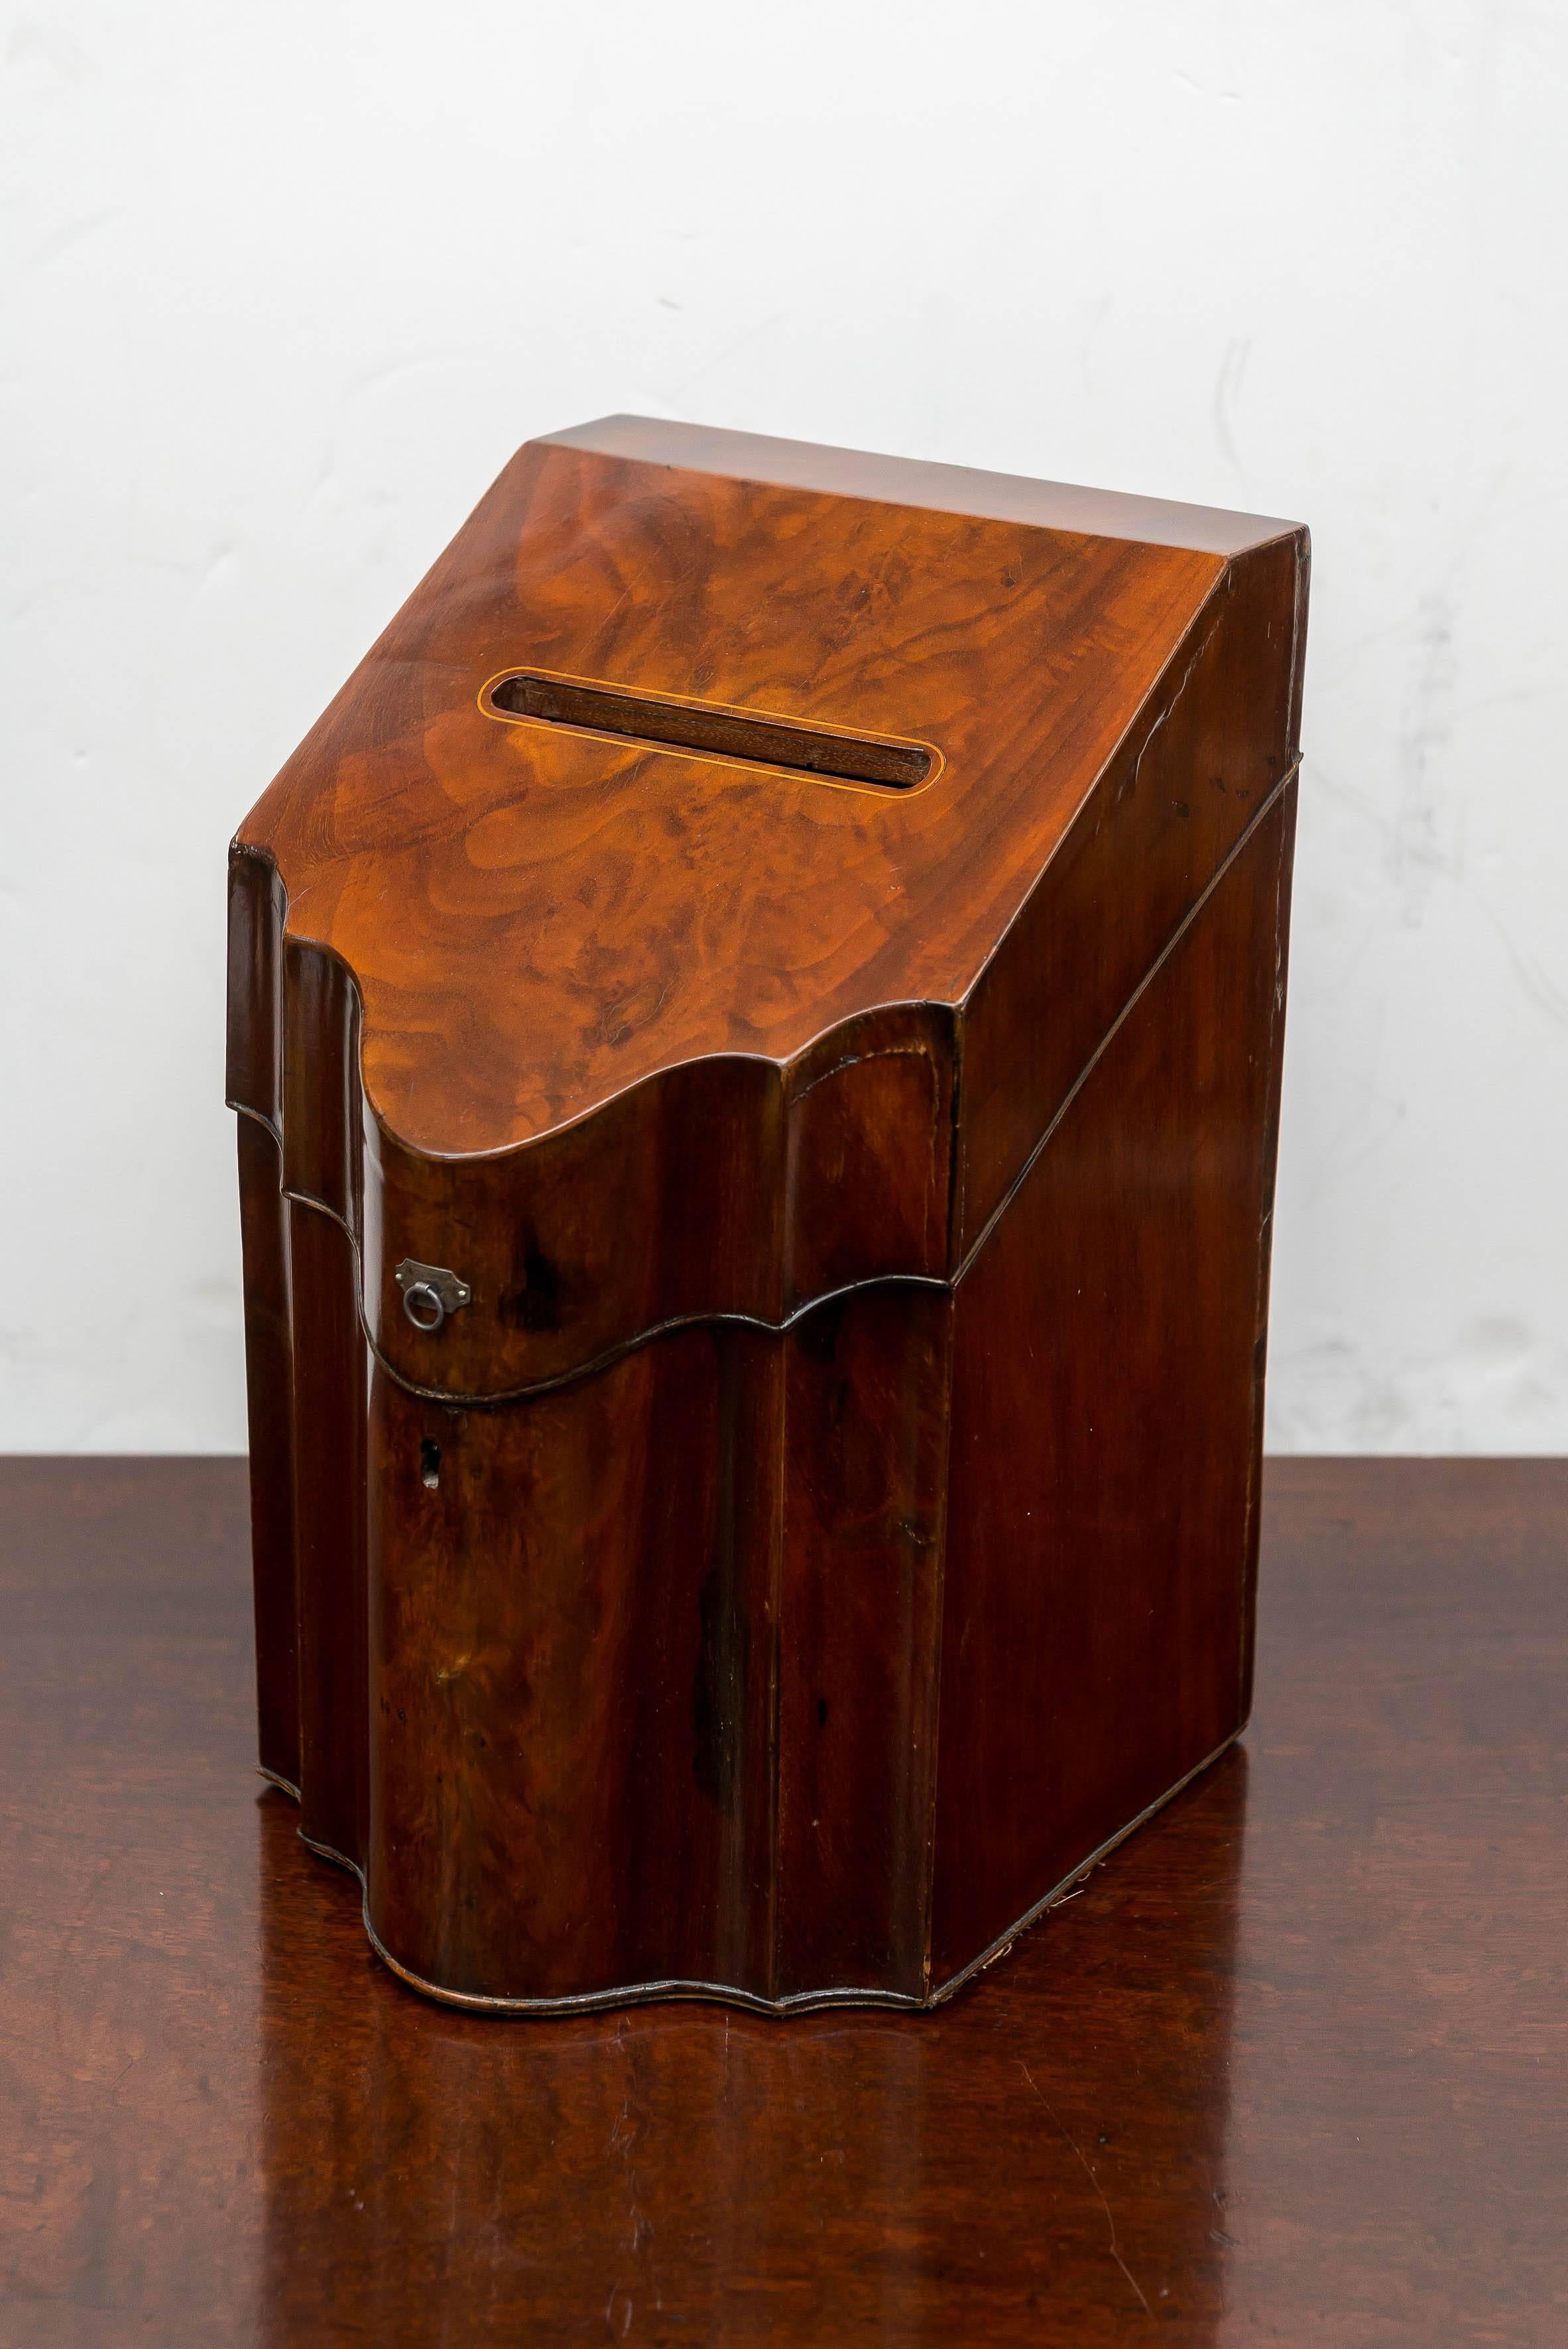 Late 18th century, English George III mahogany knife box fitted out for letters / ballots. The interior voided of the old knife compartments. One small removable interior leather insert fitted in the front portion. This was probably for a ceremonial